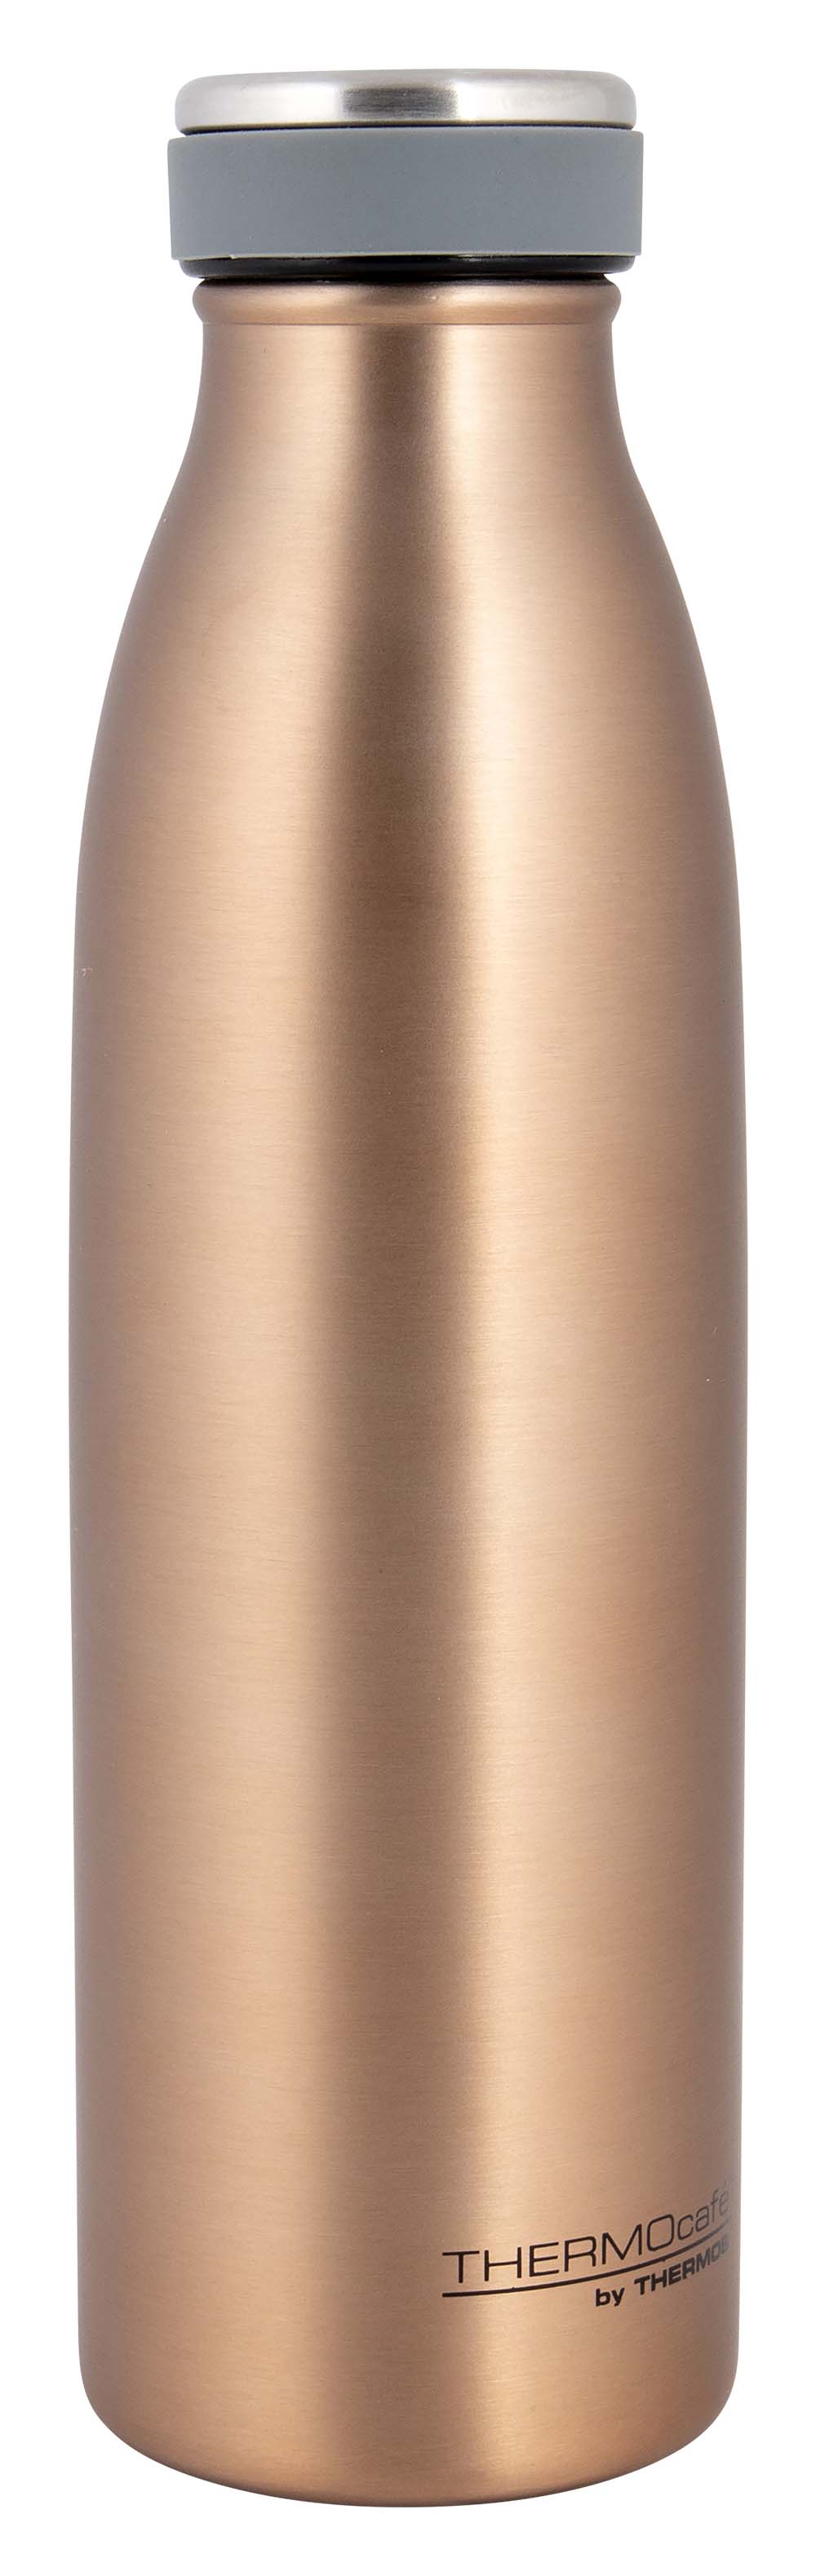 Thermos - Drinking Bottle - Cafe - Bronze